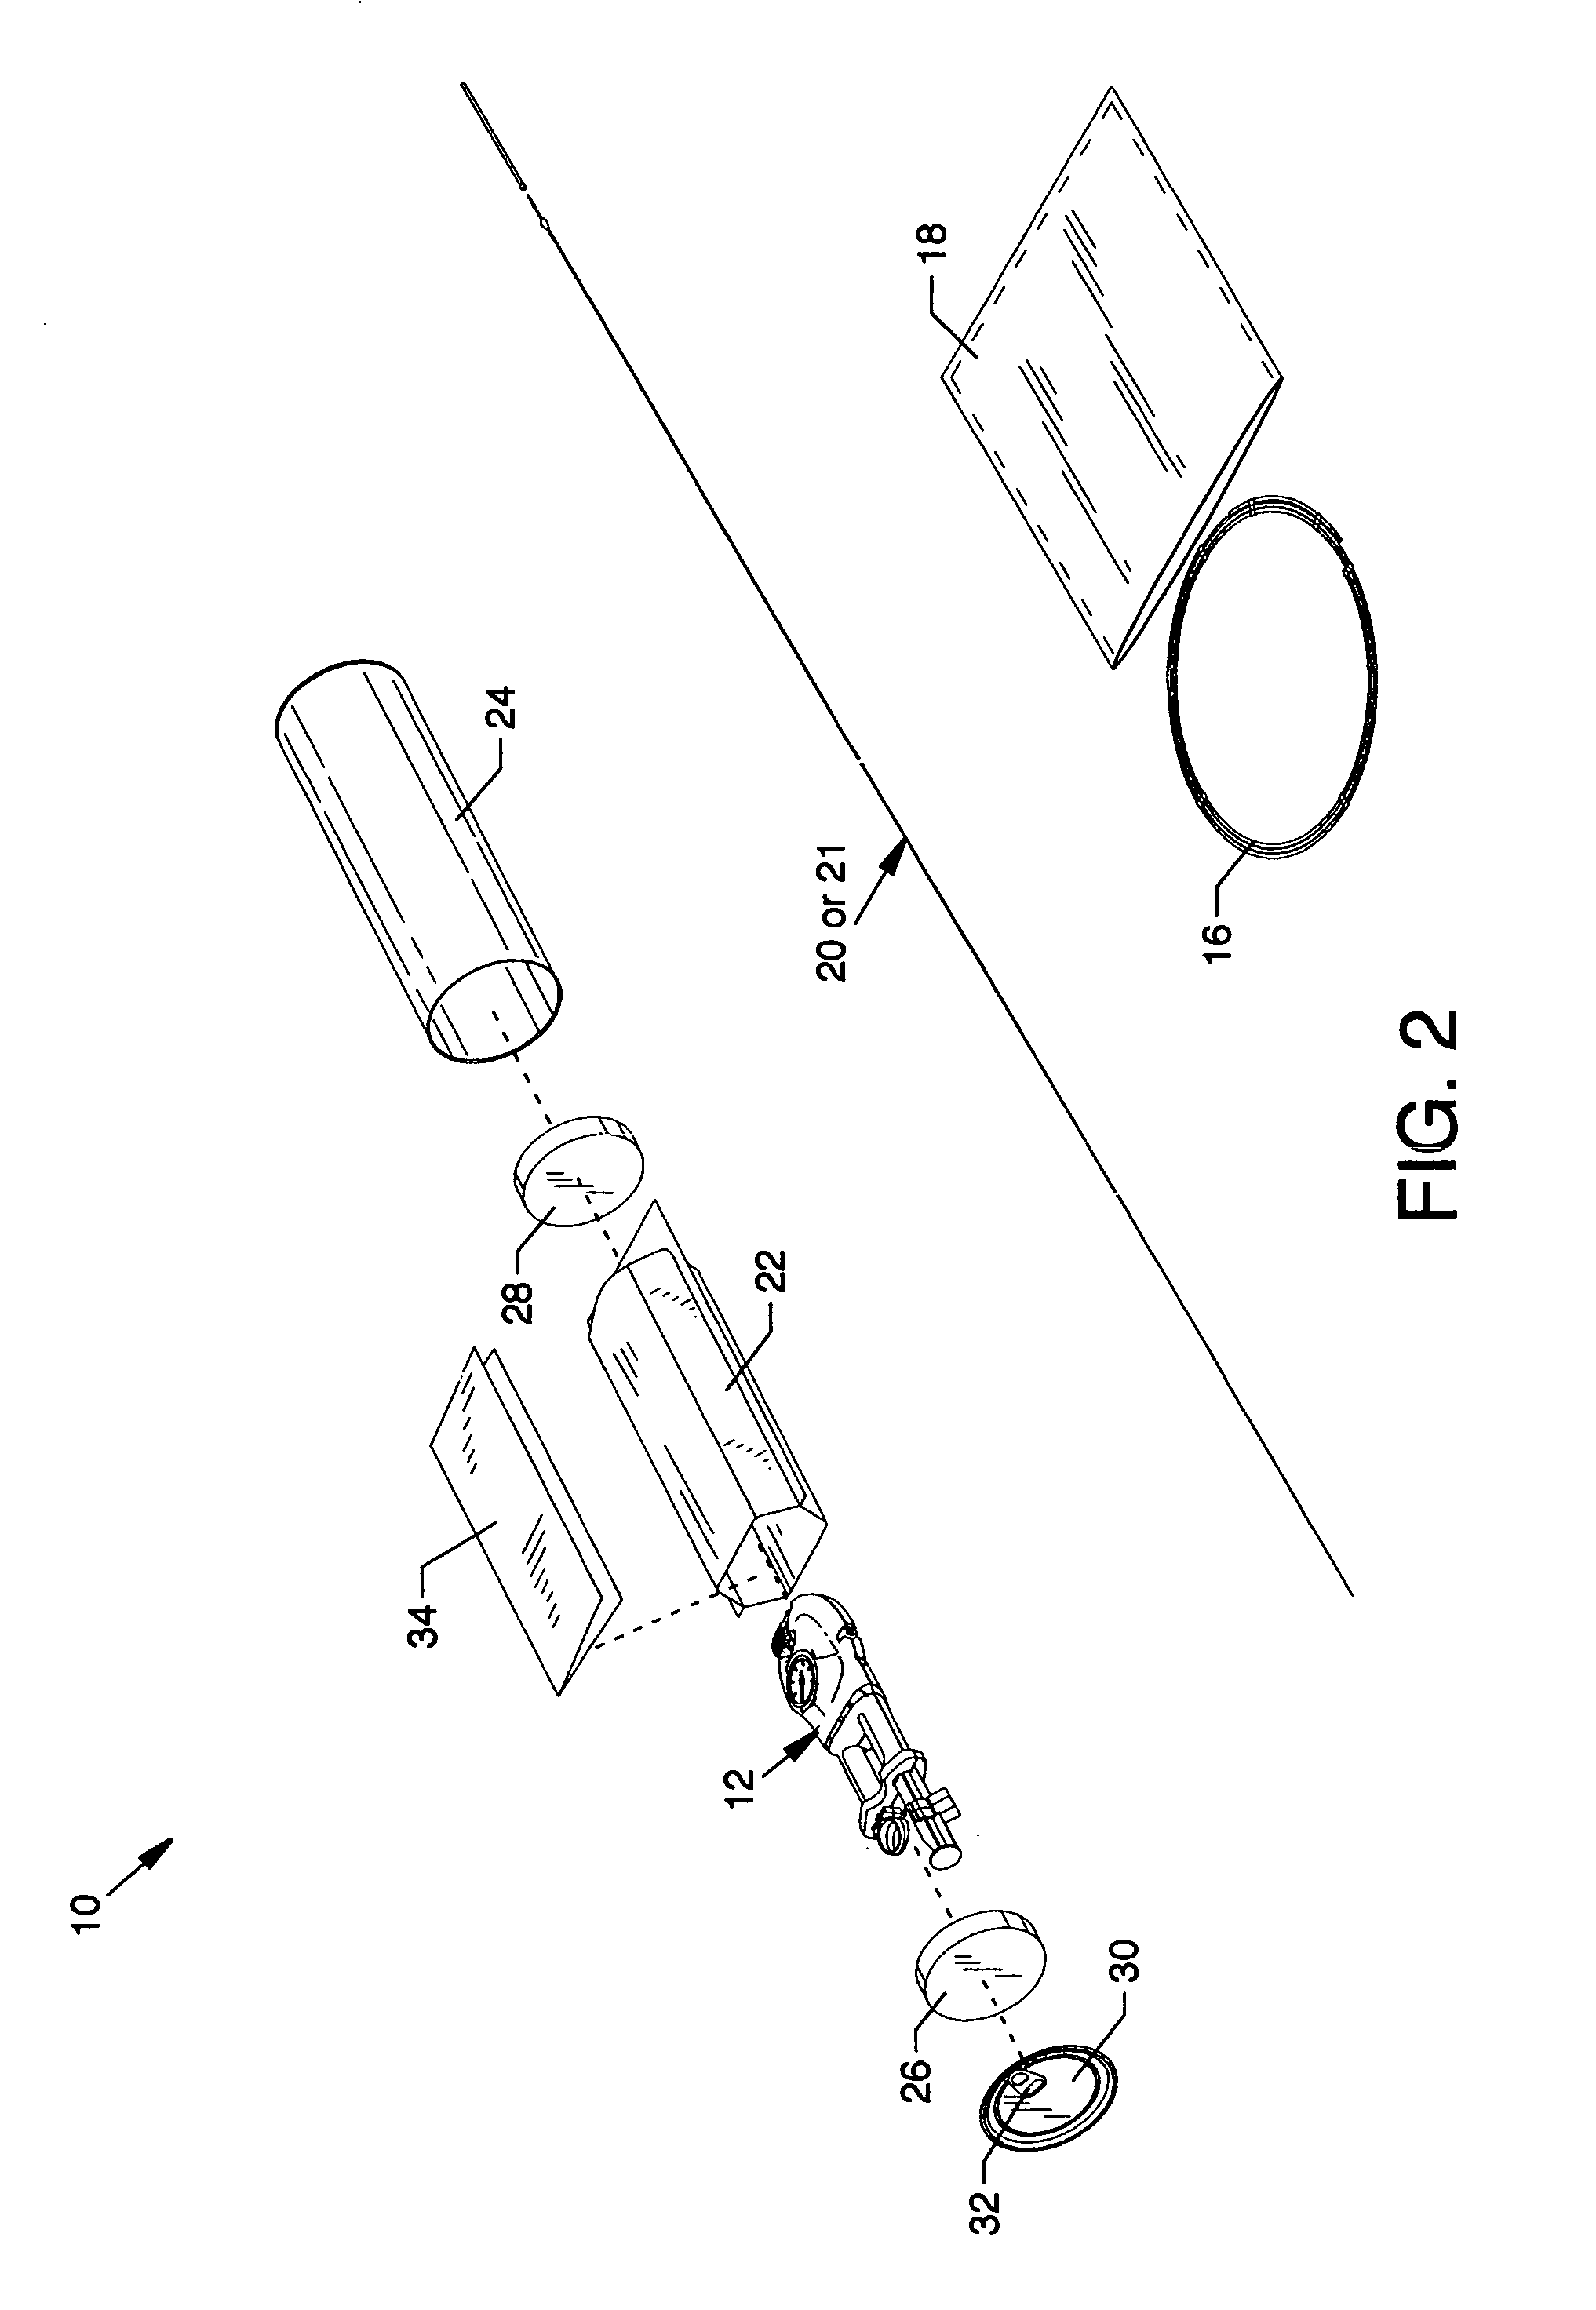 Occlusive guidewire system having an ergonomic handheld control mechanism prepackaged in a pressurized gaseous environment and a compatible prepackaged torqueable kink-resistant guidewire with distal occlusive balloon